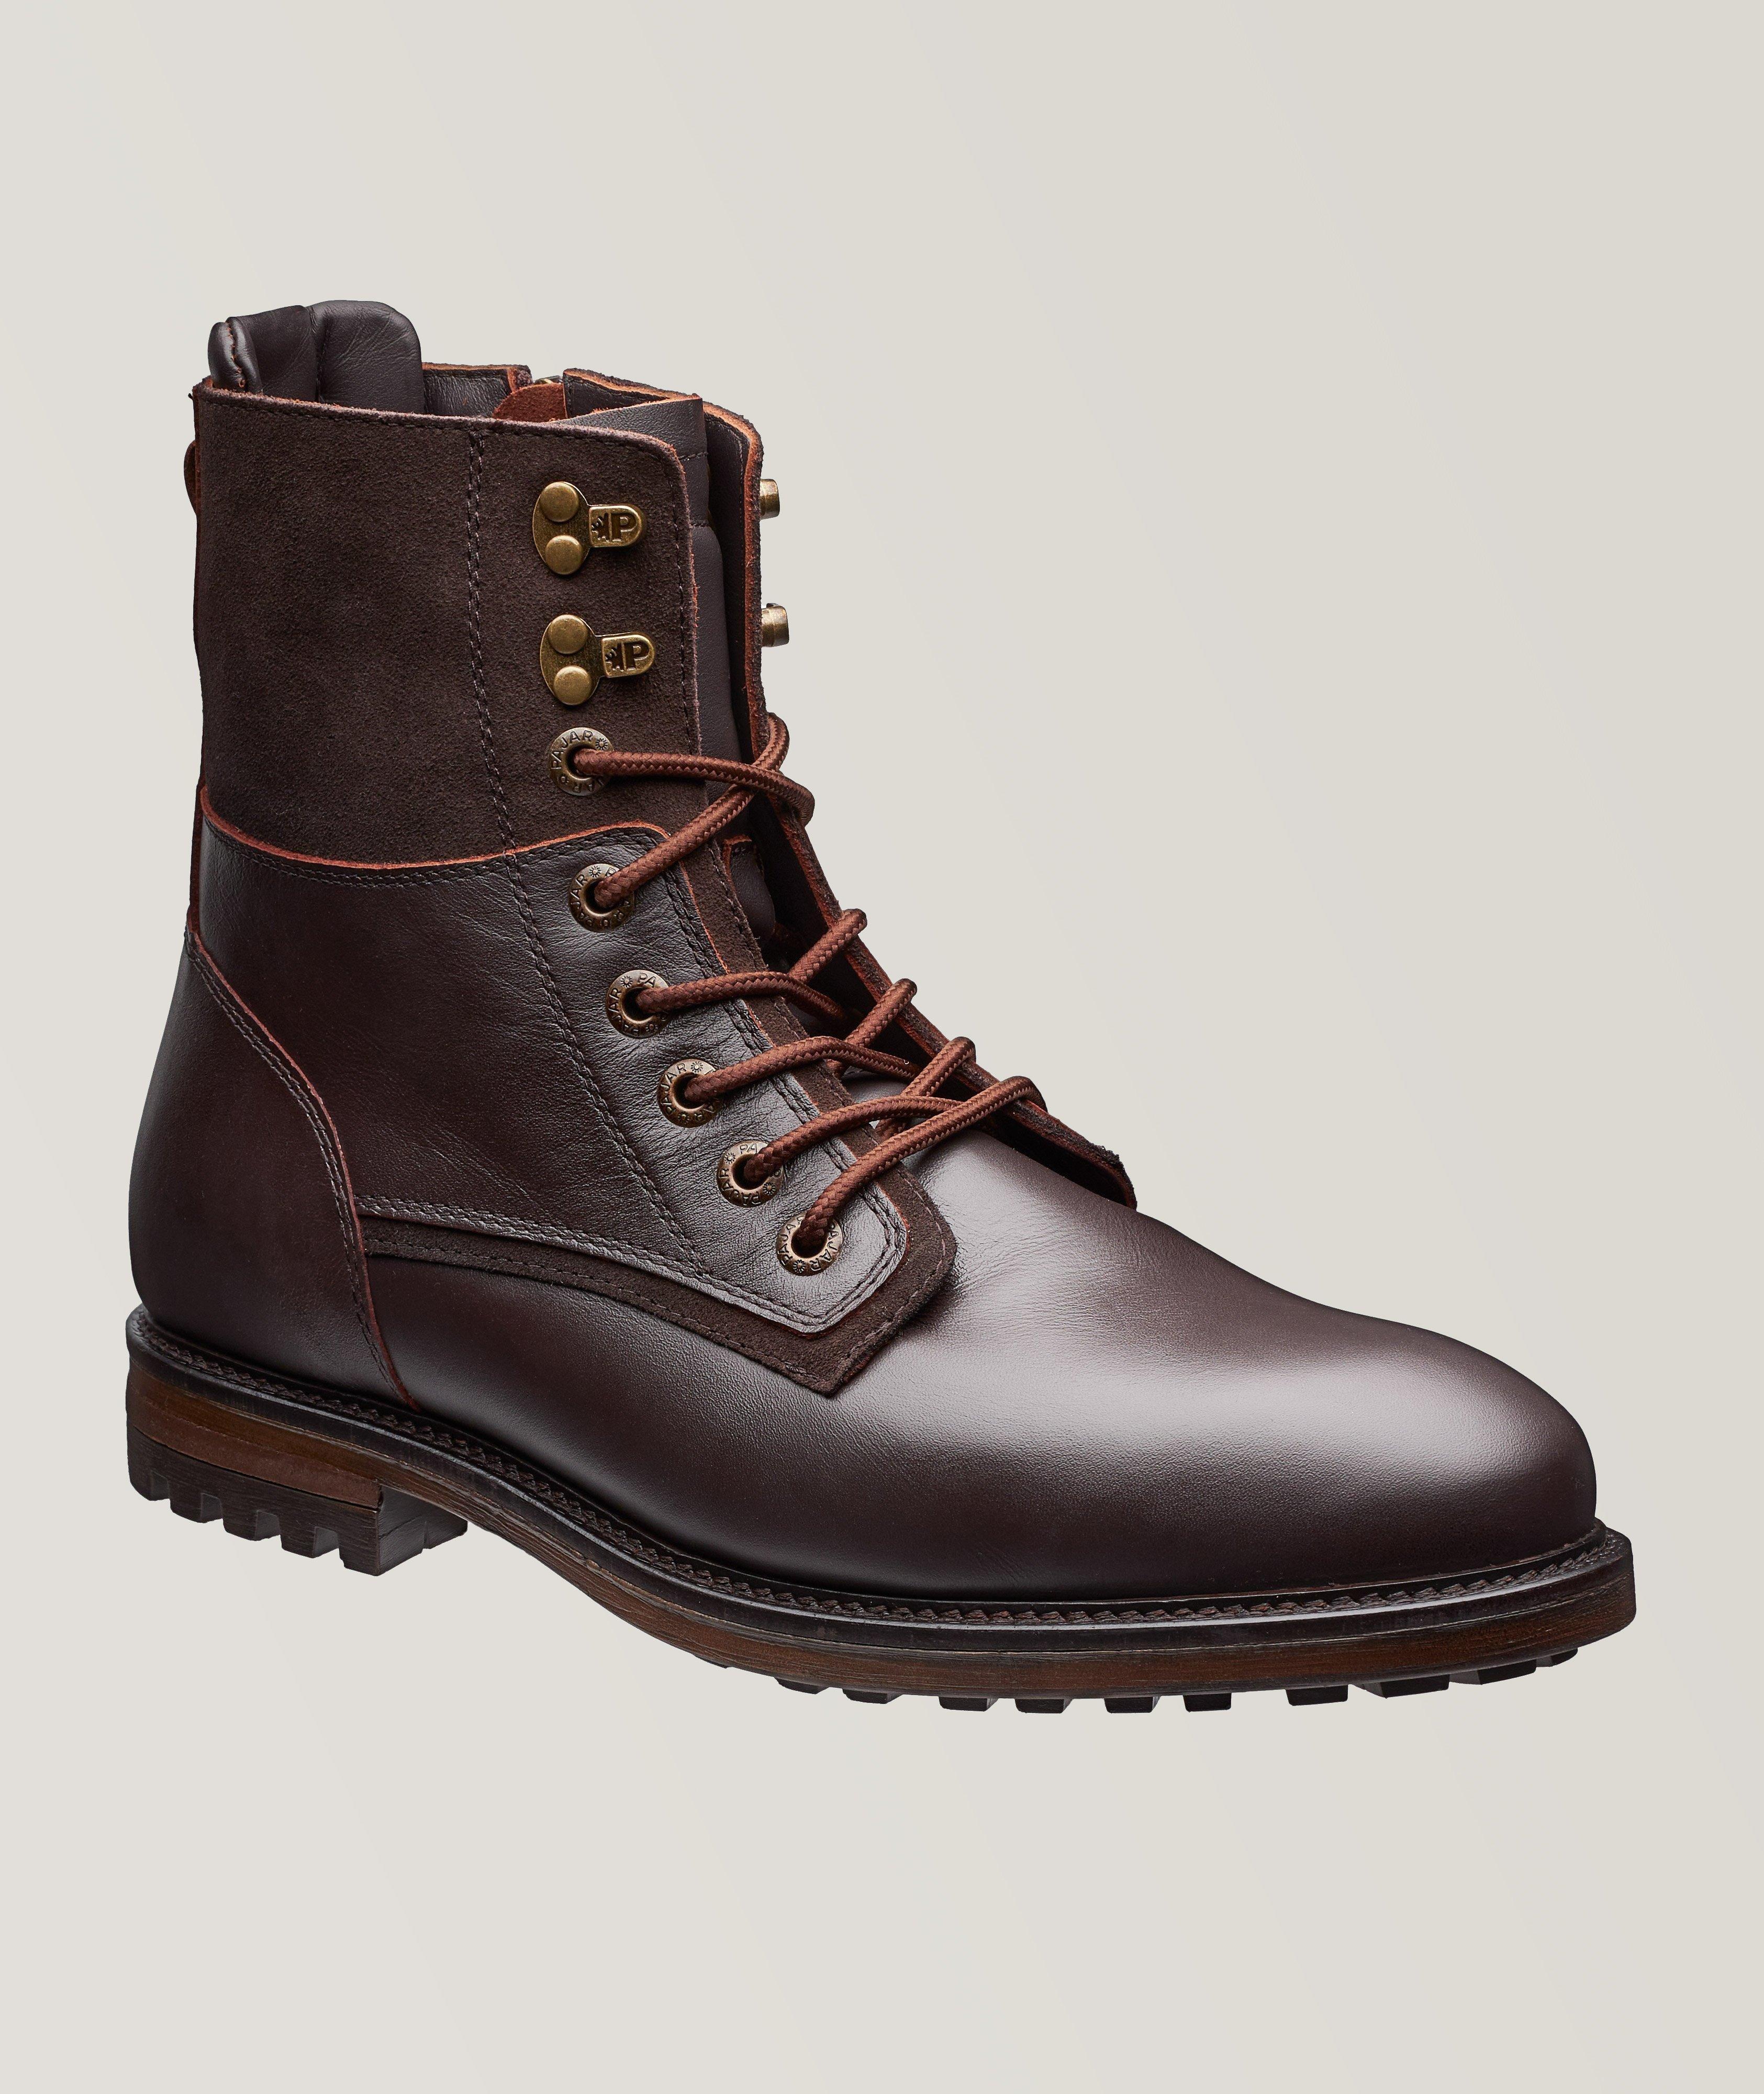 Elite Waterproof Leather-Shearling Boots image 0